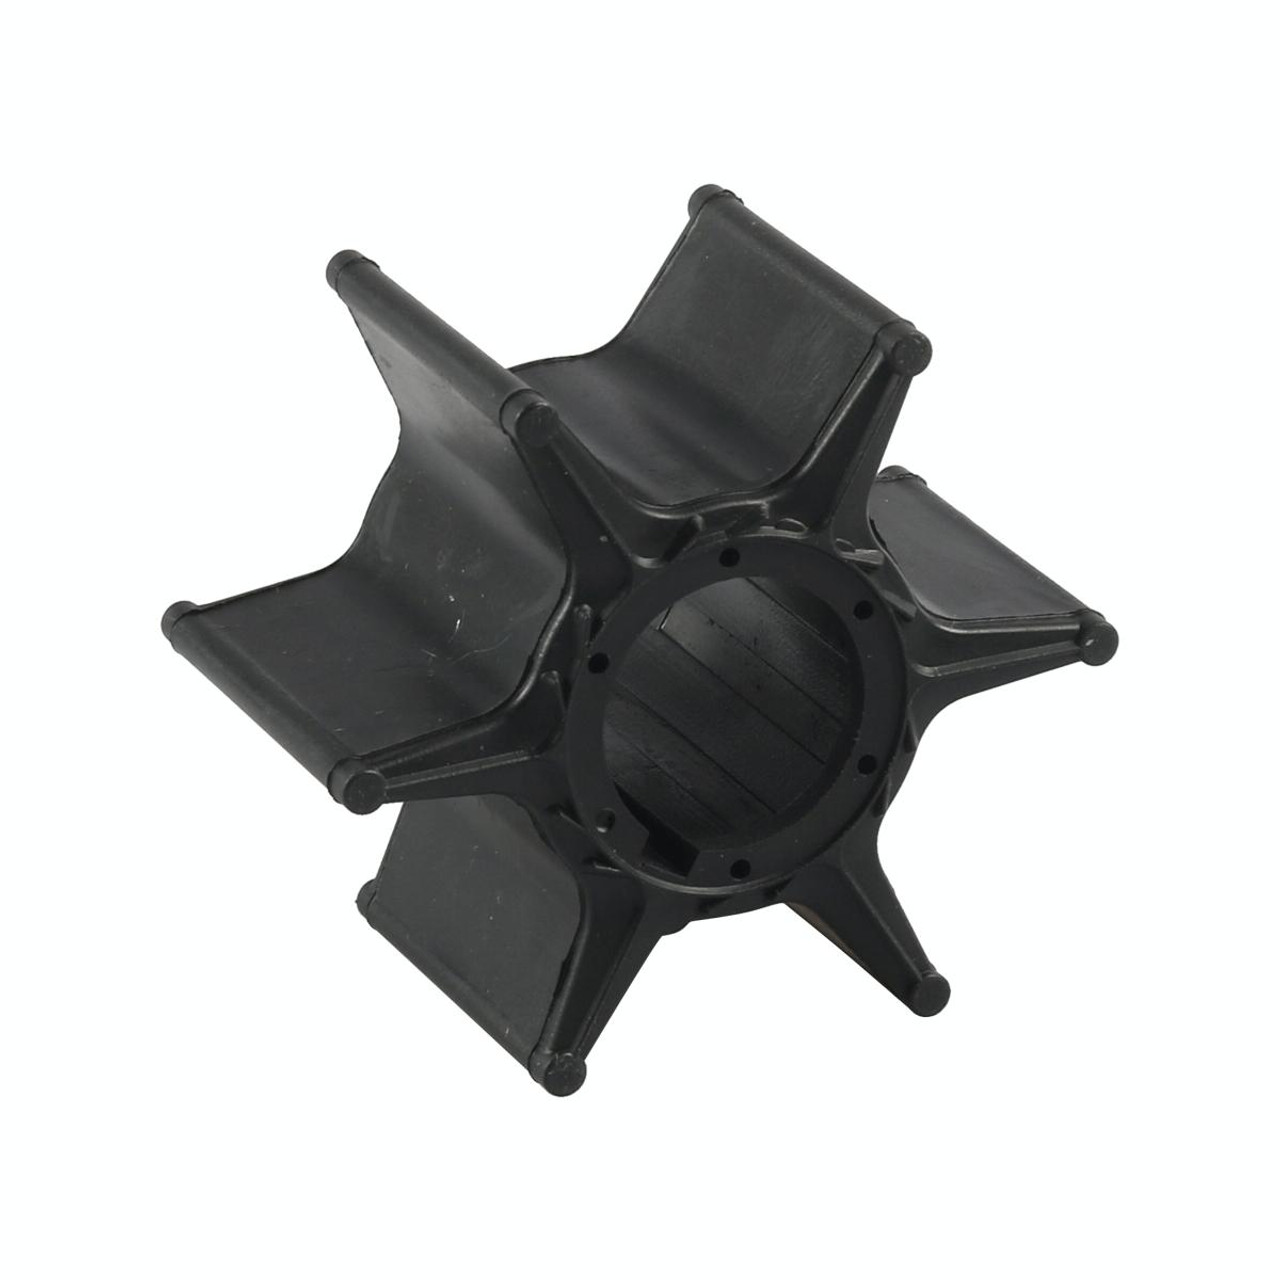 A8533 For Yamaha Outboard Pump Impeller 67F-44352-01, snatcher